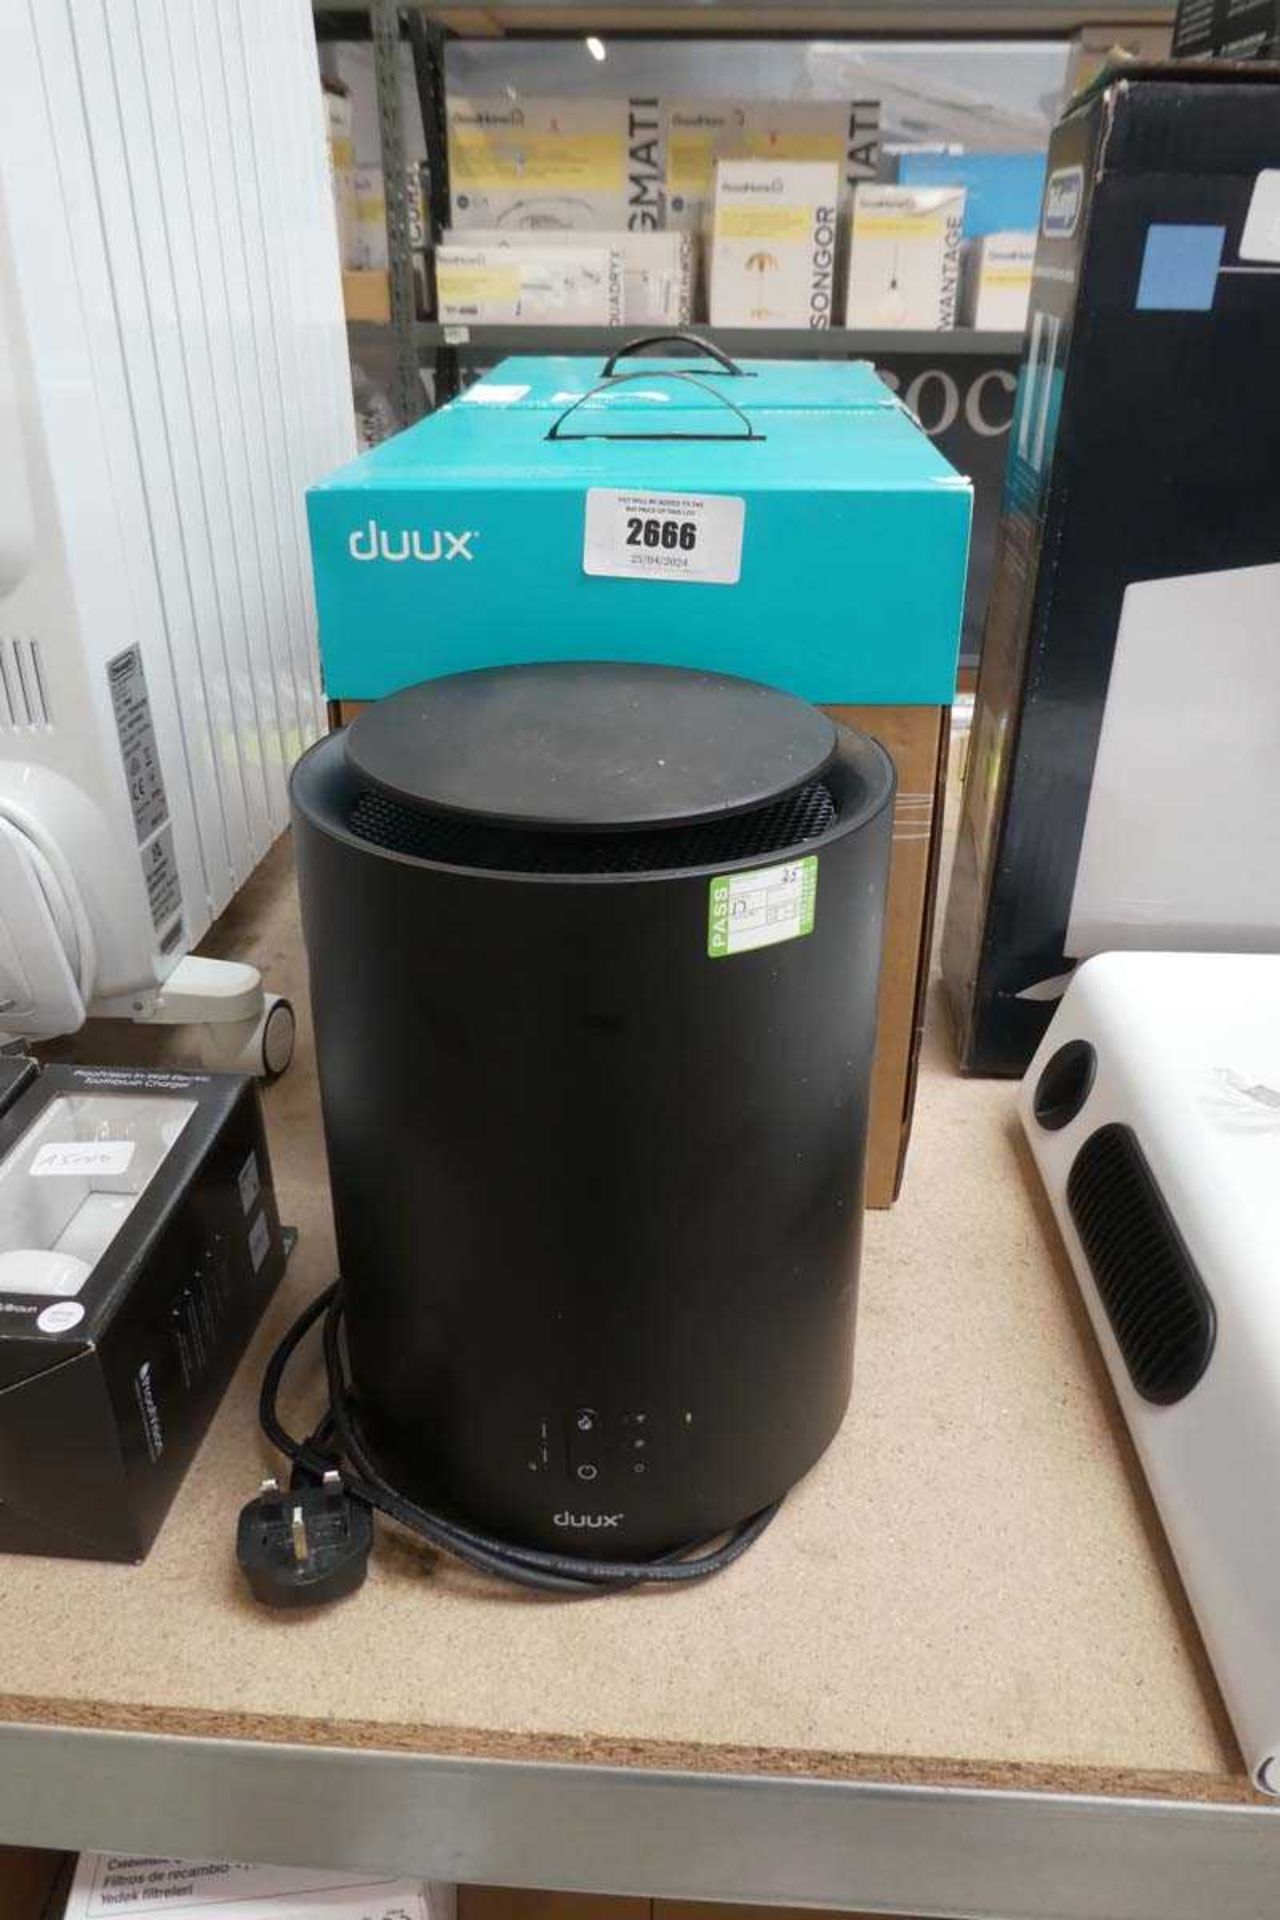 +VAT 3 Duux Three Sixty 2 heaters (2 boxed, 1 unboxed)